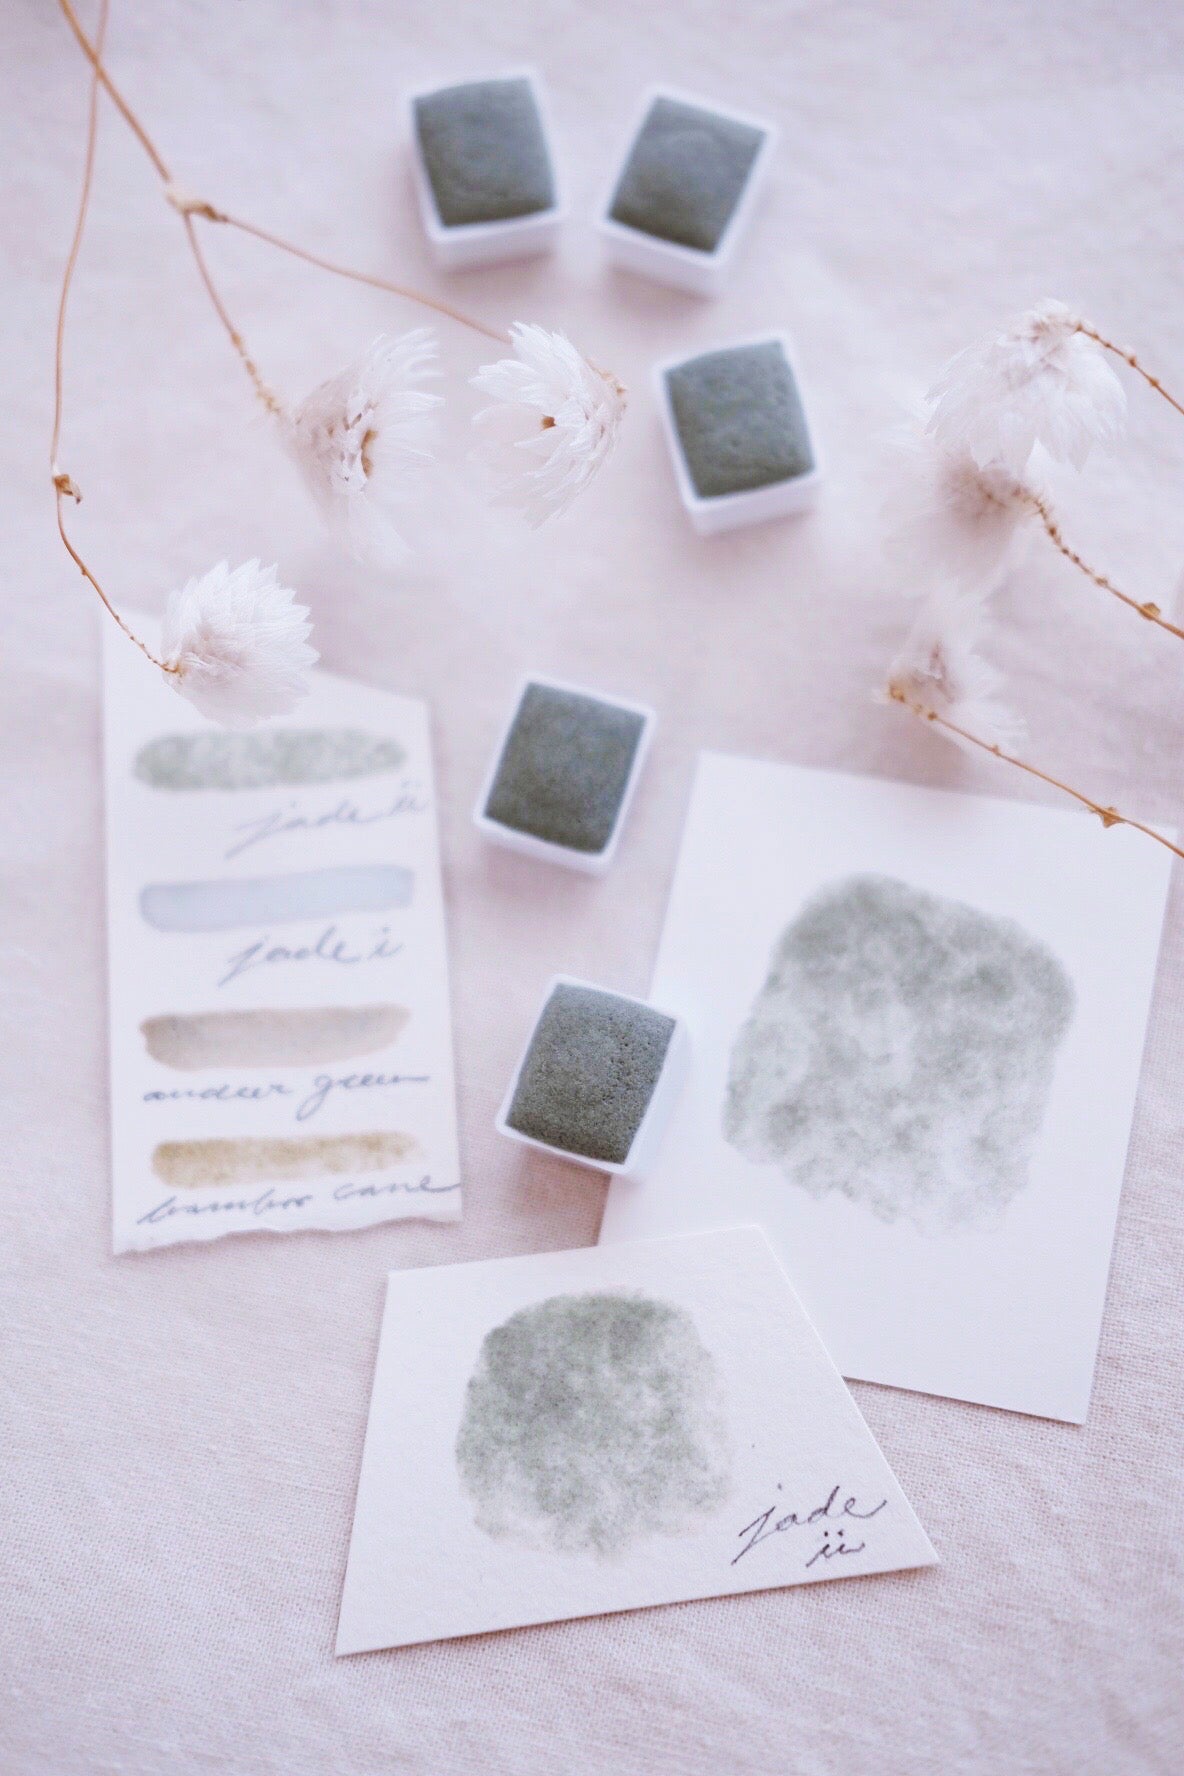 Jade + Stone of five virtues + Limited edition gemstone watercolor